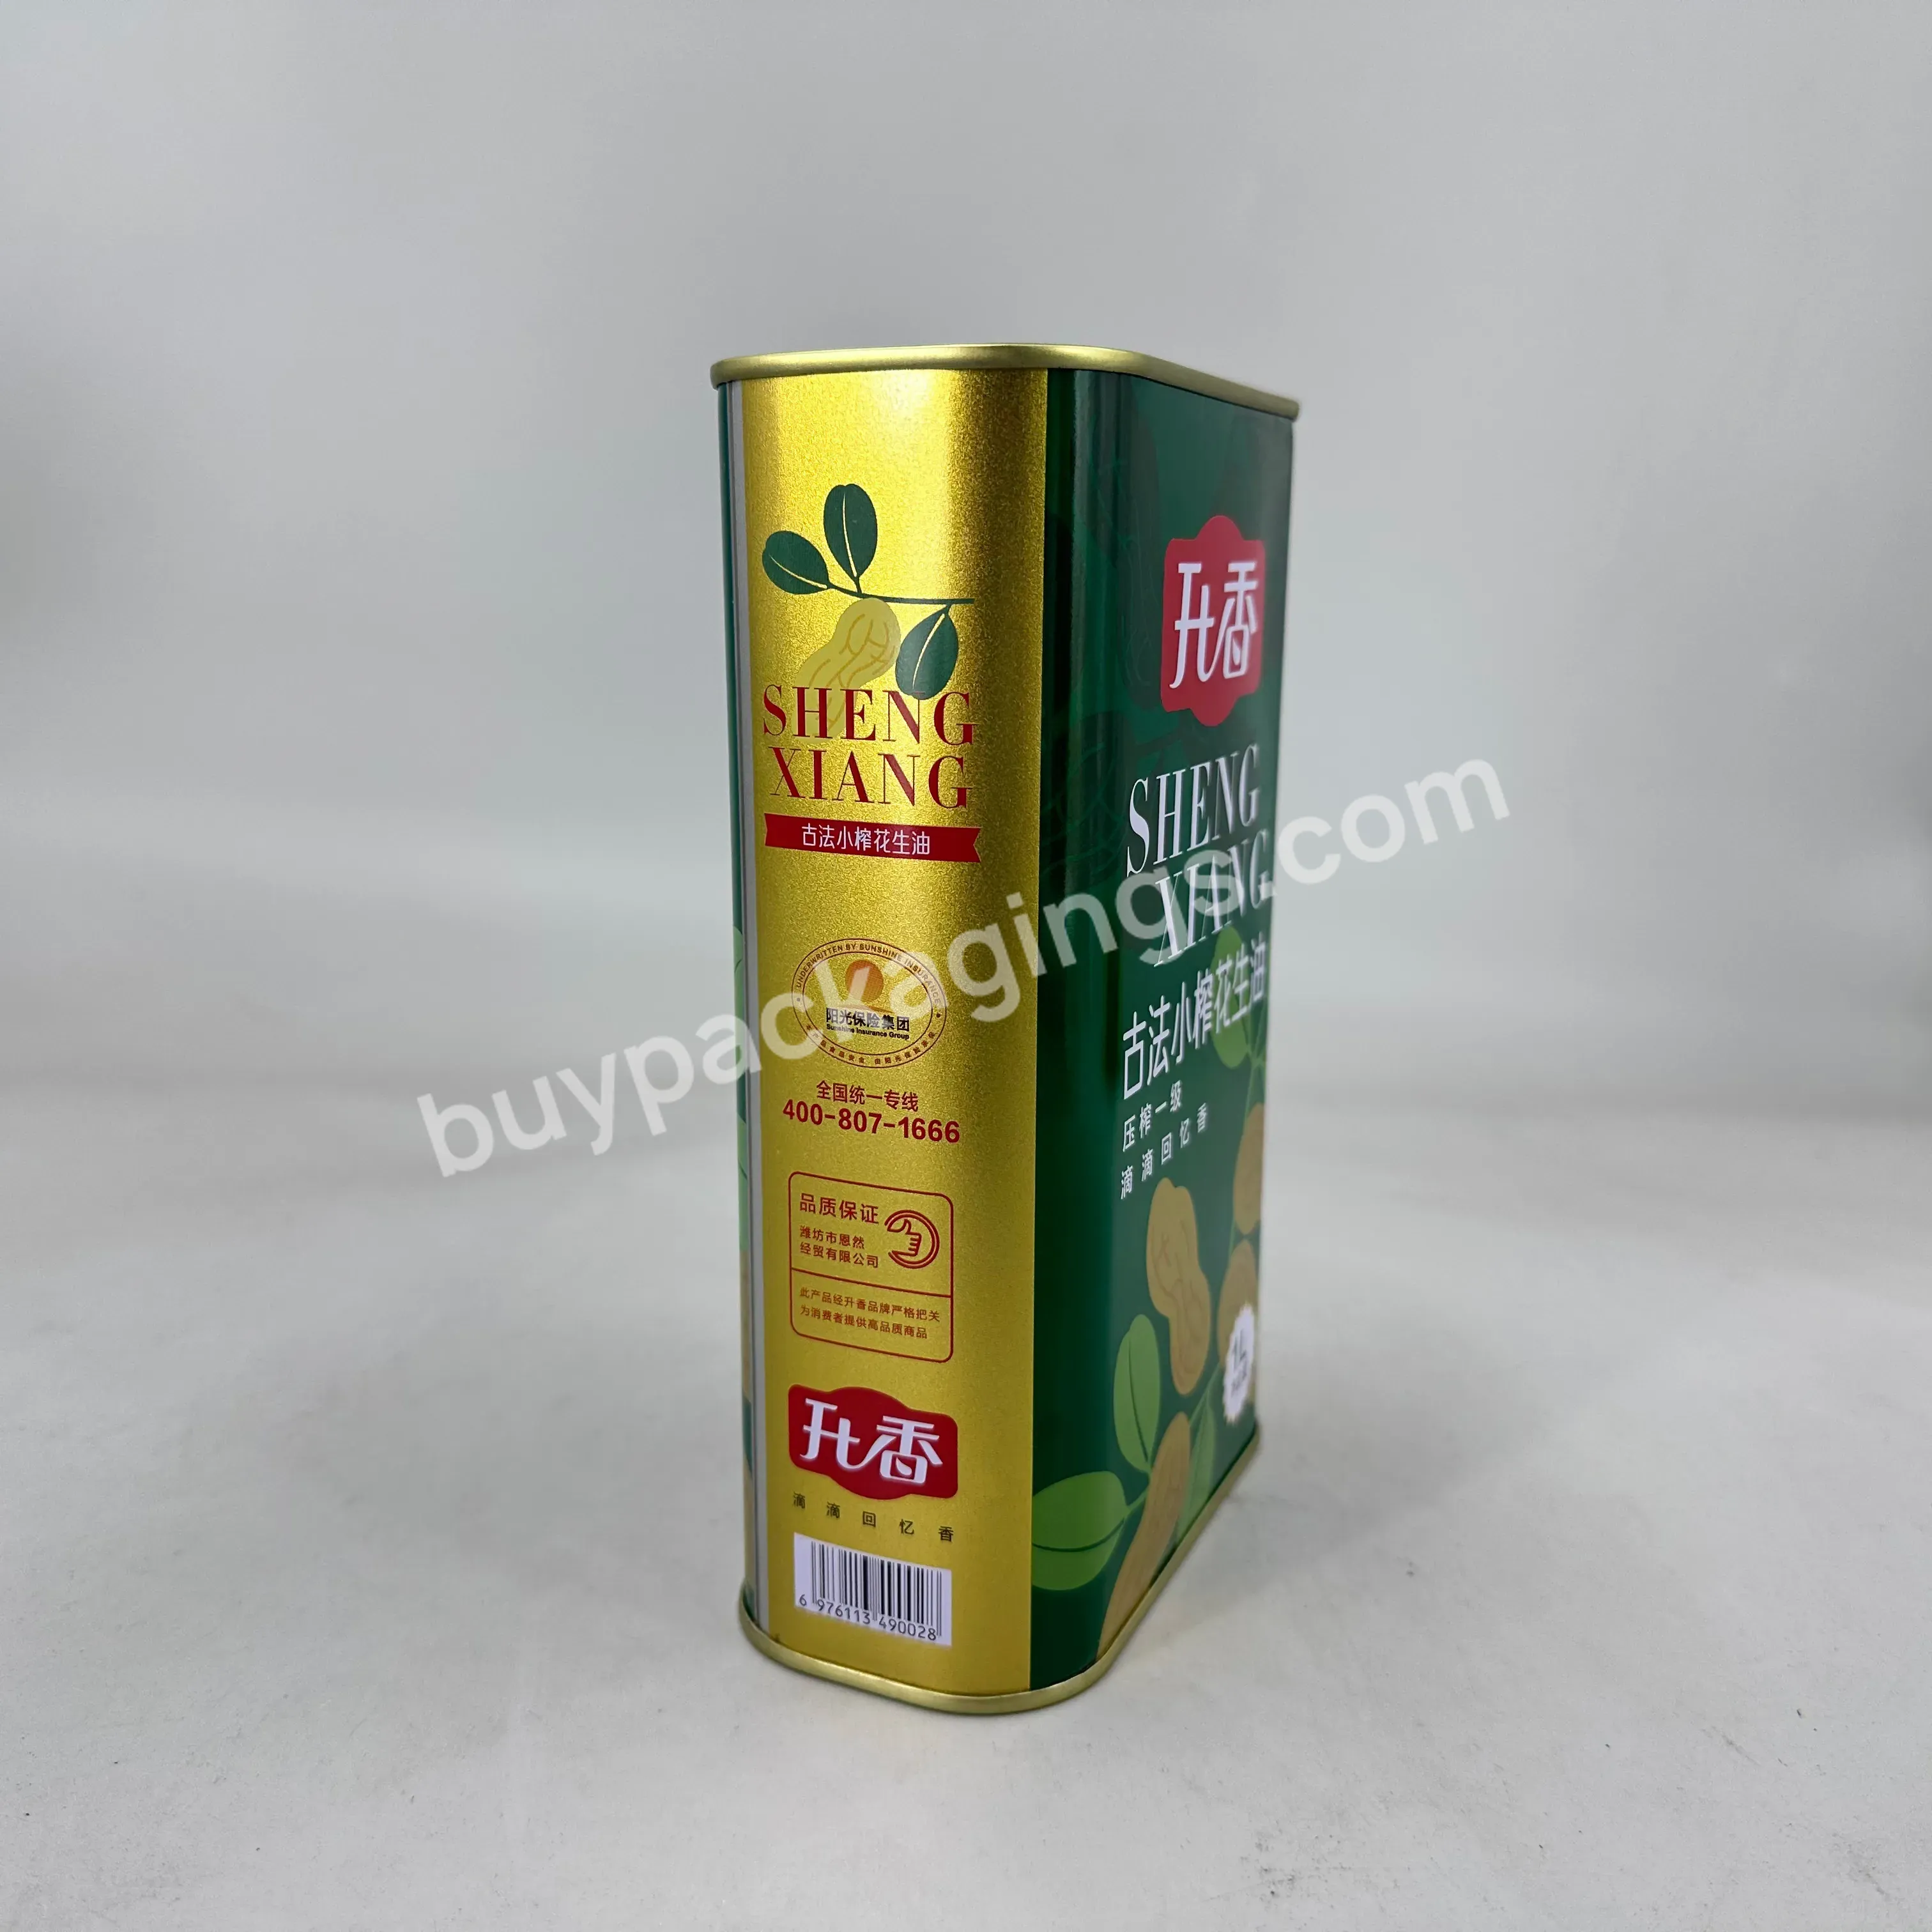 Factory Wholesale 1l Olive Oil F-style Tin Can High Quality Empty Tin Oil Packing Customized Metal Oil Tin Can With Plastic Lid - Buy 1l Olive Oil F-style Tin Can,High Quality Empty Tin Oil Packing,Customized Metal Oil Tin Can.